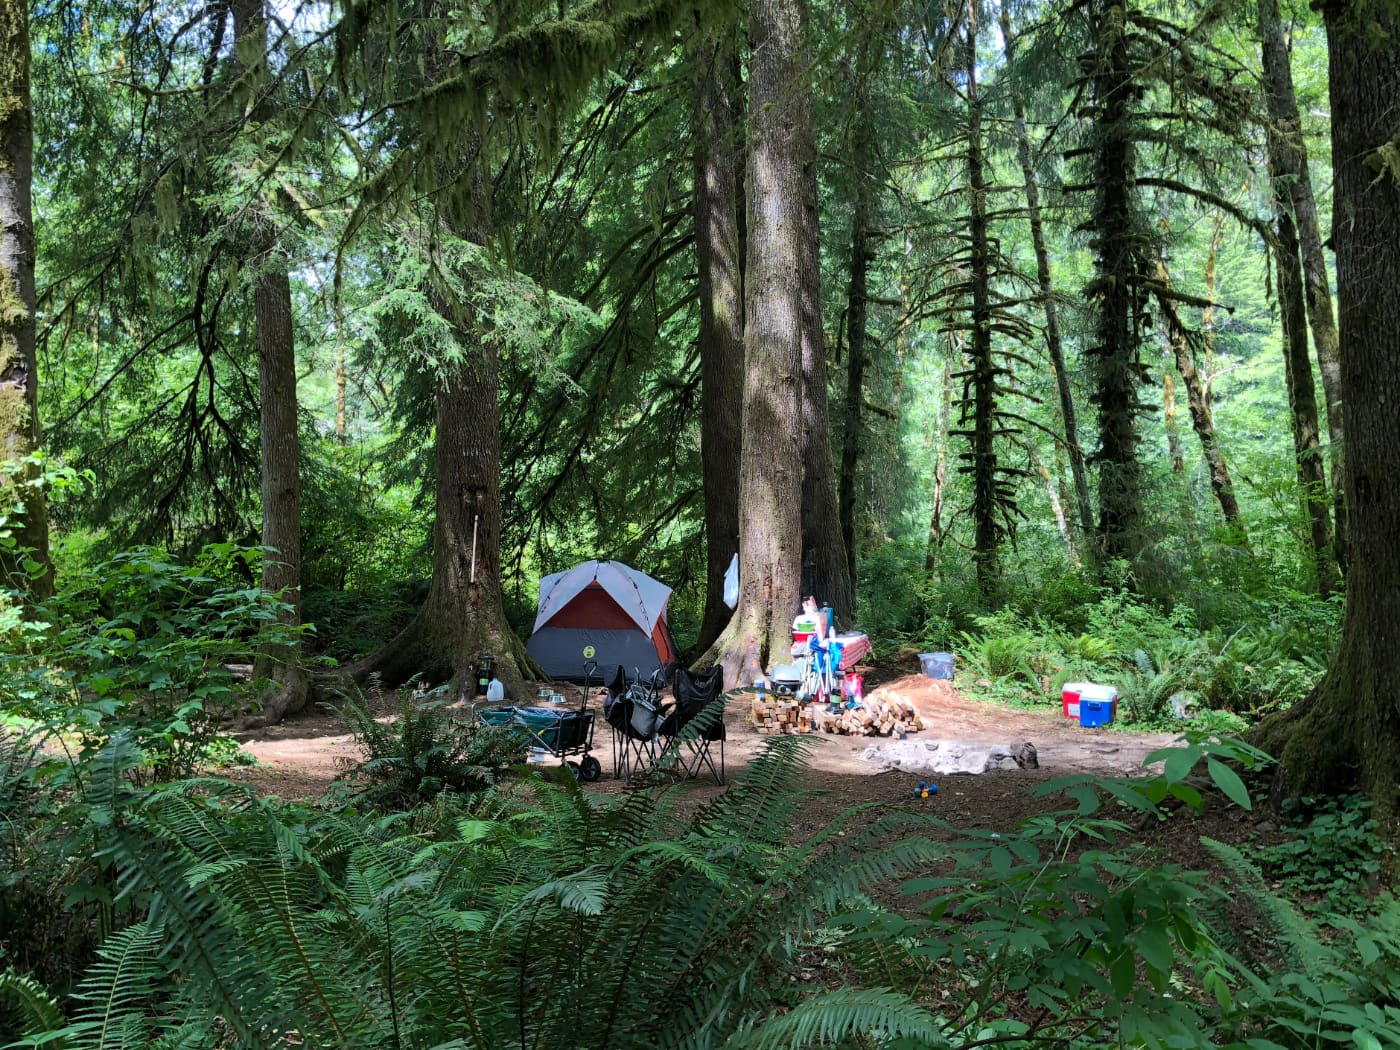 A grey and orange tent, a pile of firewood, and coolers in a clearing below pine trees in the middle of the forest.